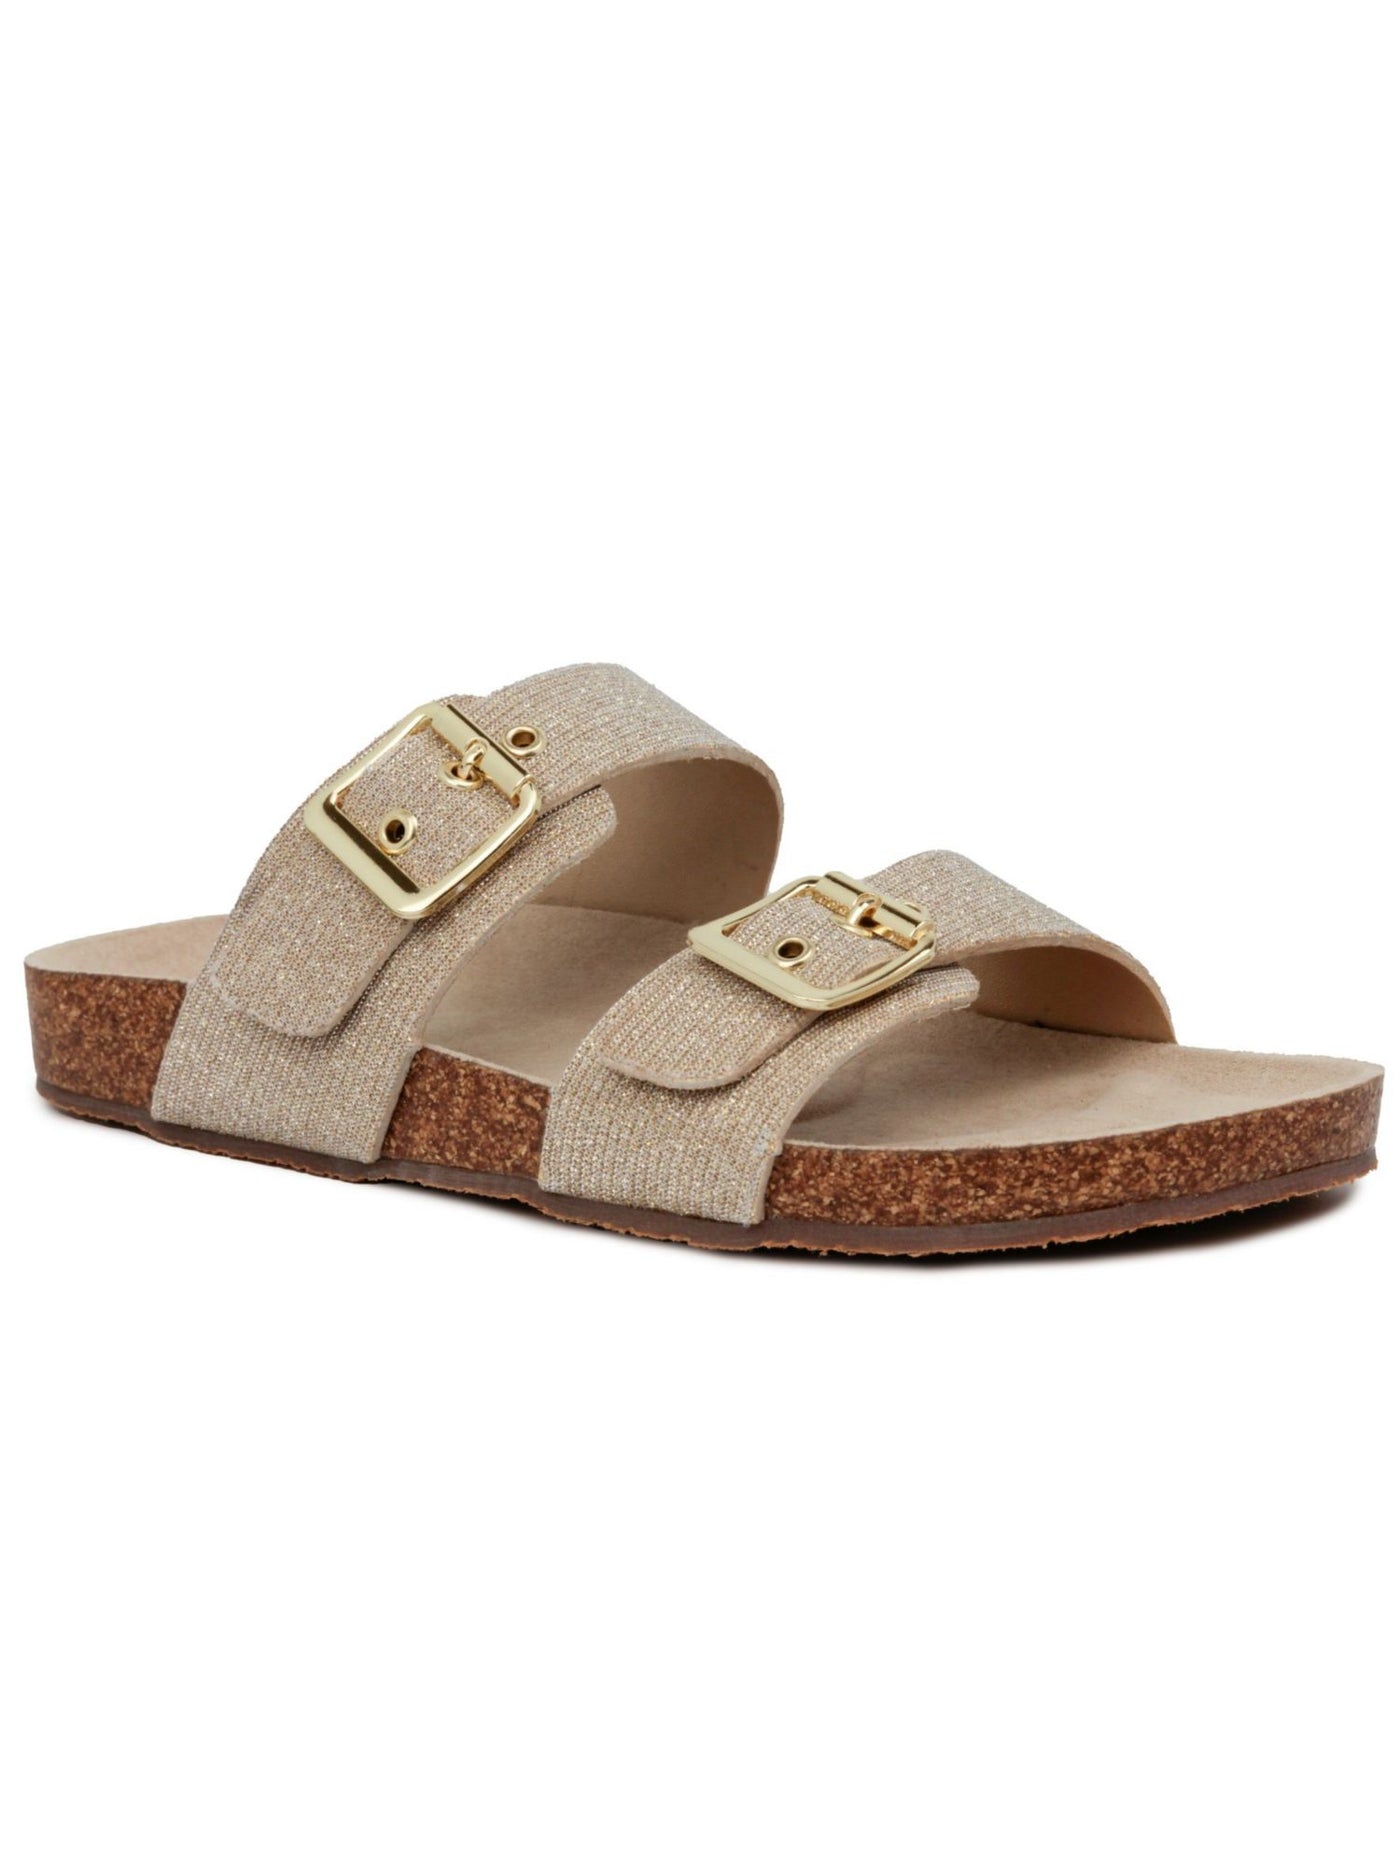 JONES NY Womens Gold Double Band Cork-Like Jute Buckle Accent Arch Support Weslee Round Toe Platform Slip On Slide Sandals 7 H M